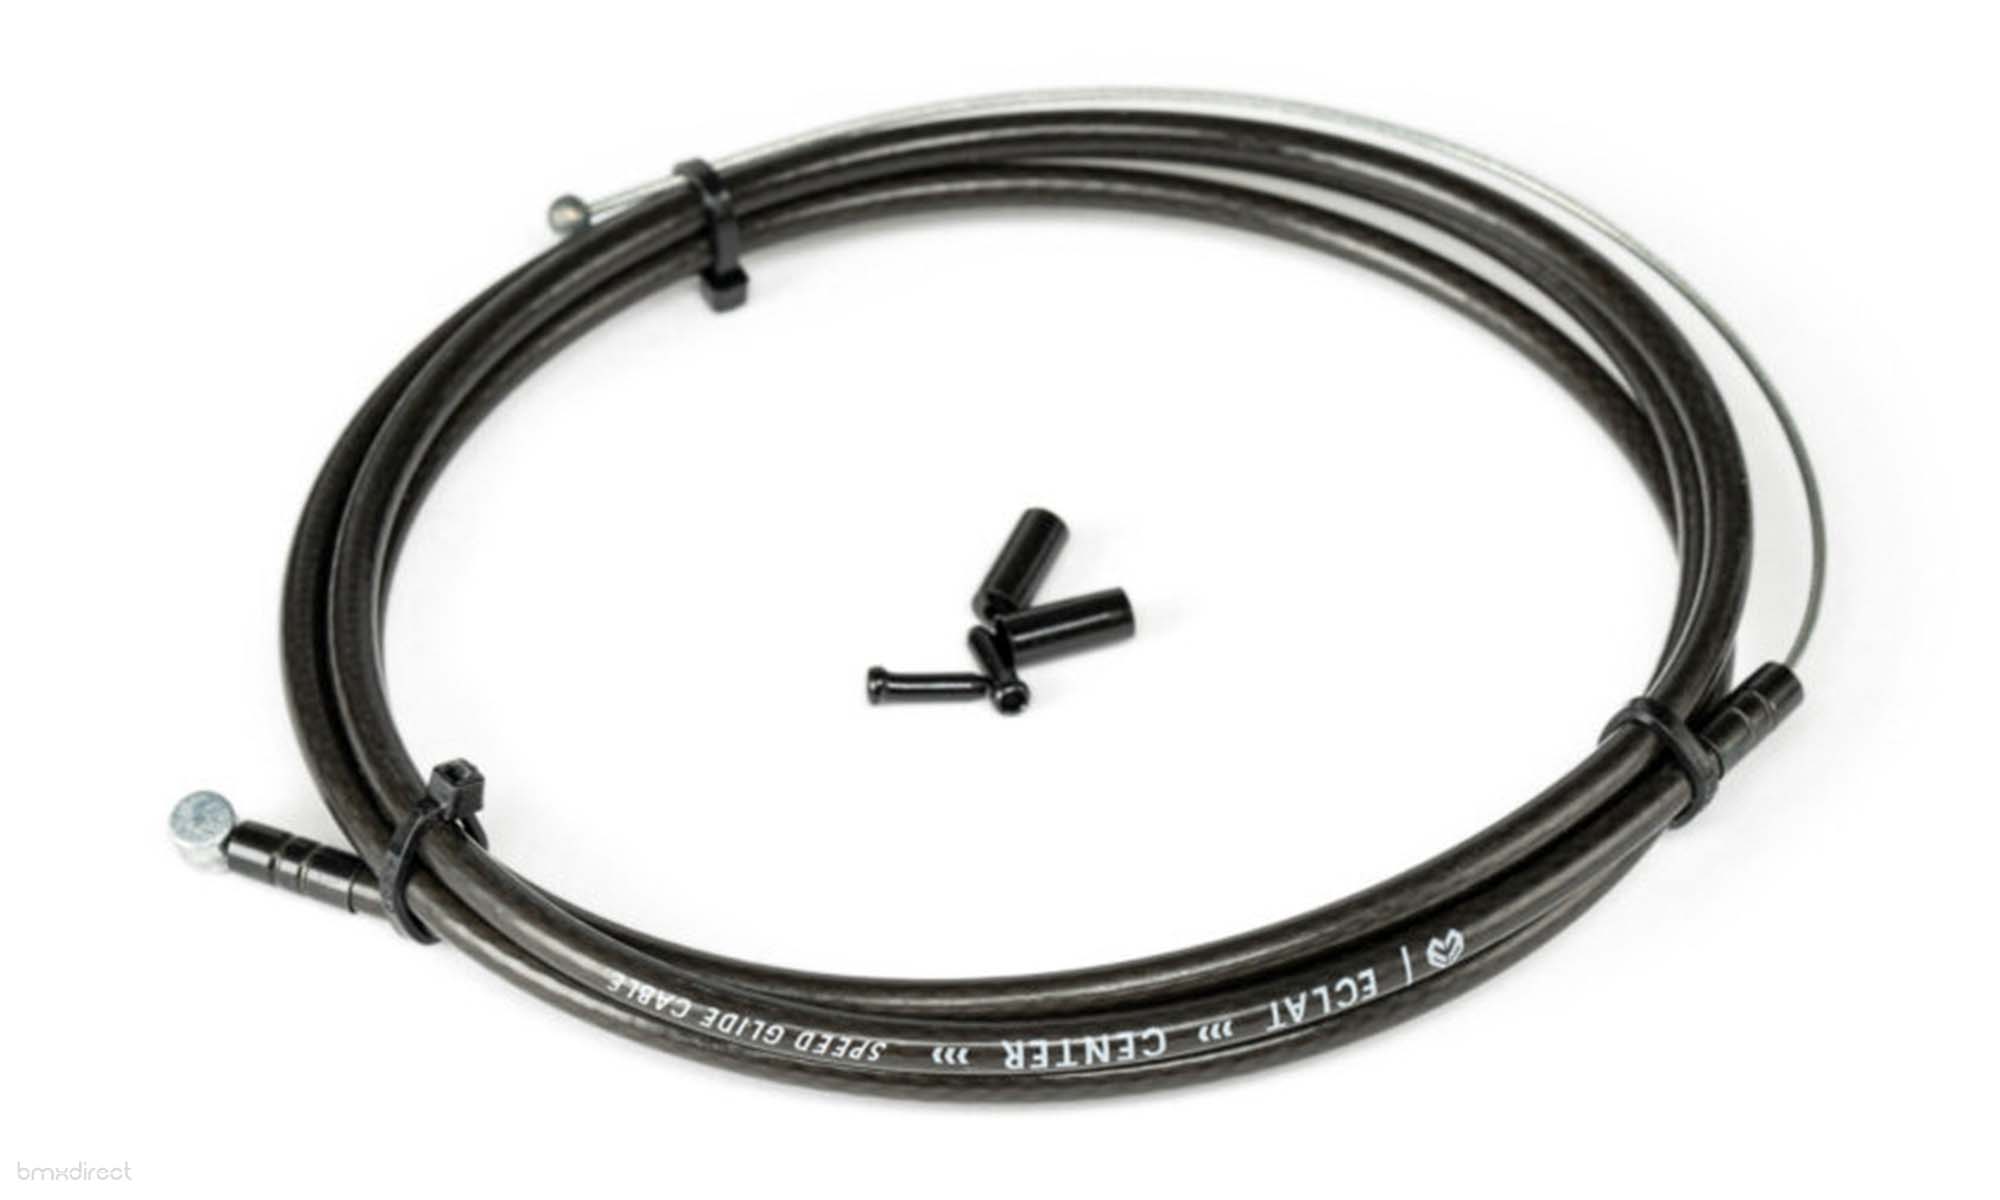 Eclat The Center Linear Cable - Black